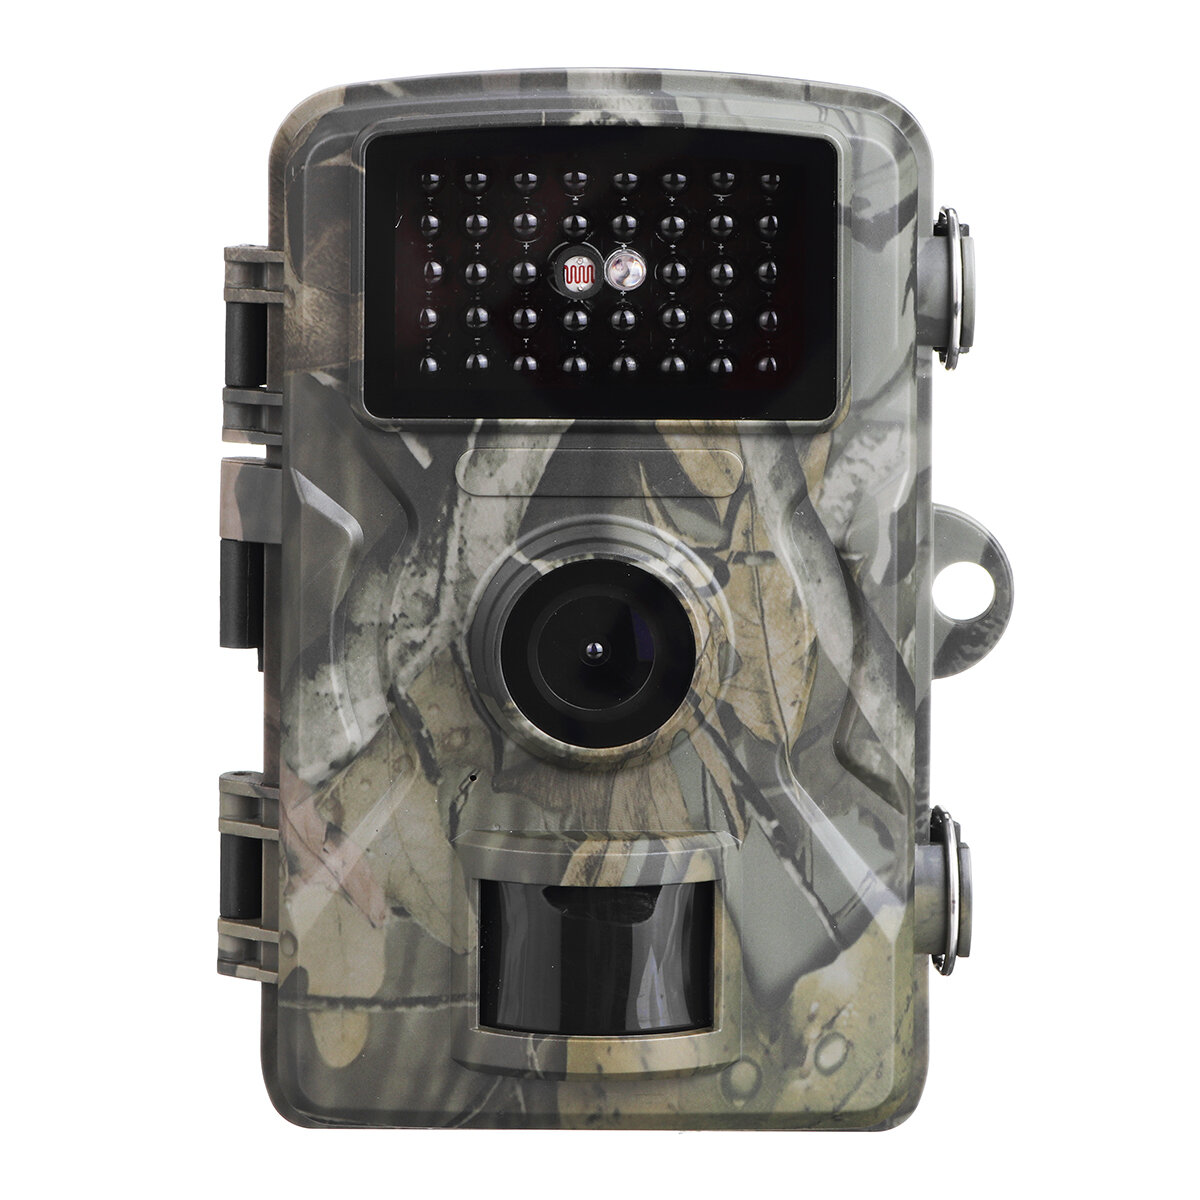 Image of INSMA 12MP Trail Camera Hunting Camera 1080P Motion Latest Sensor View 03s Trigger Time Trail Game Camera IP66 Waterpro